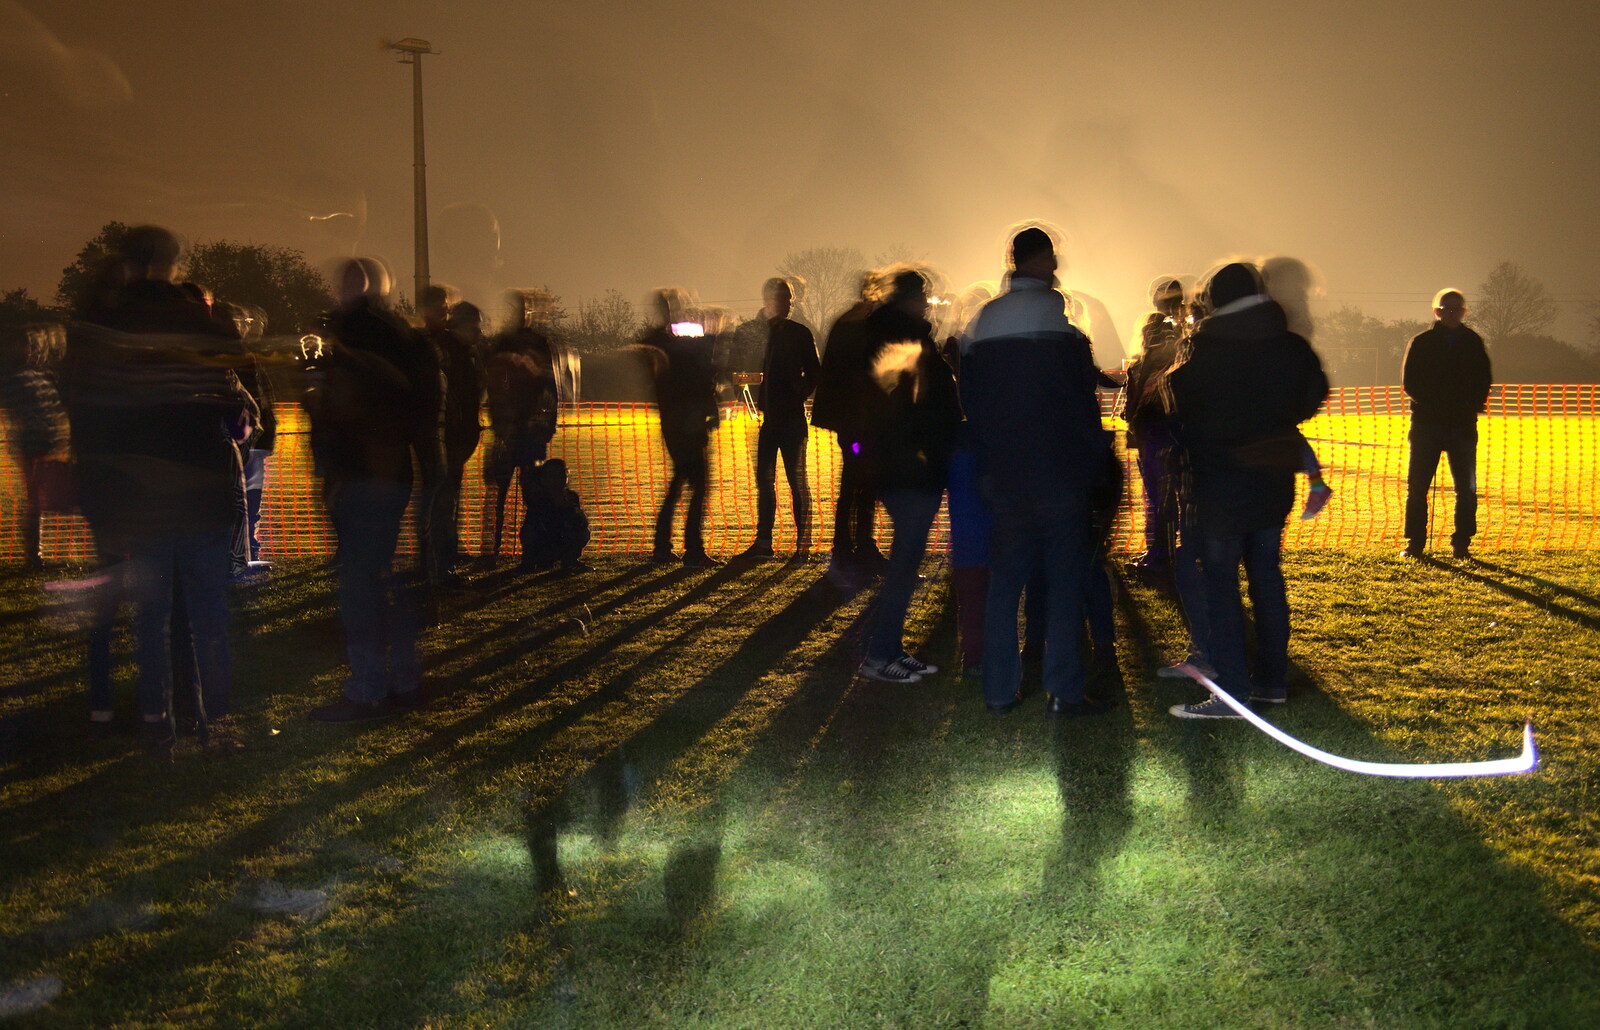 The crowds wait for the fireworks to start from Apples and Fireworks, Carleton Rode and Palgrave, Suffolk - 4th November 2018